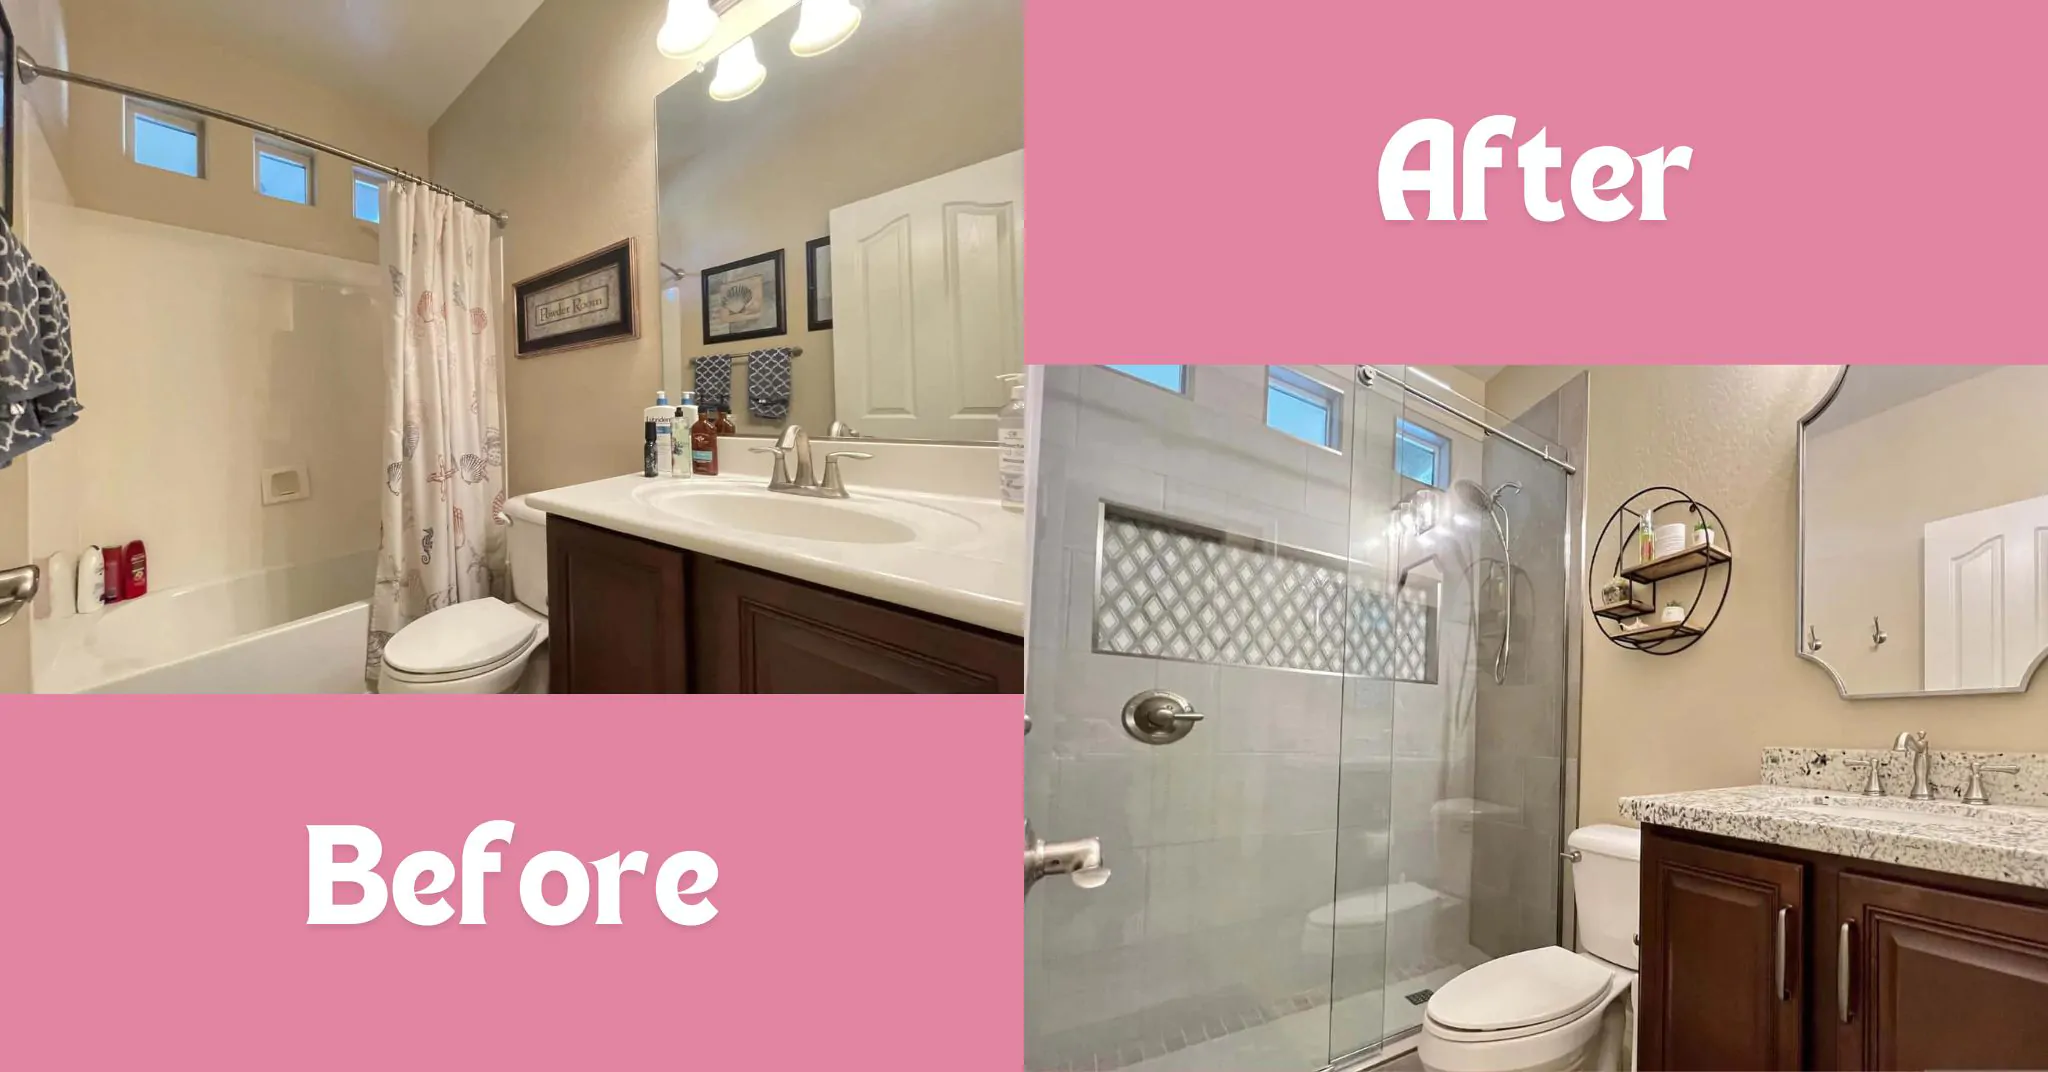 Bathroom Remodeling Services Before and After